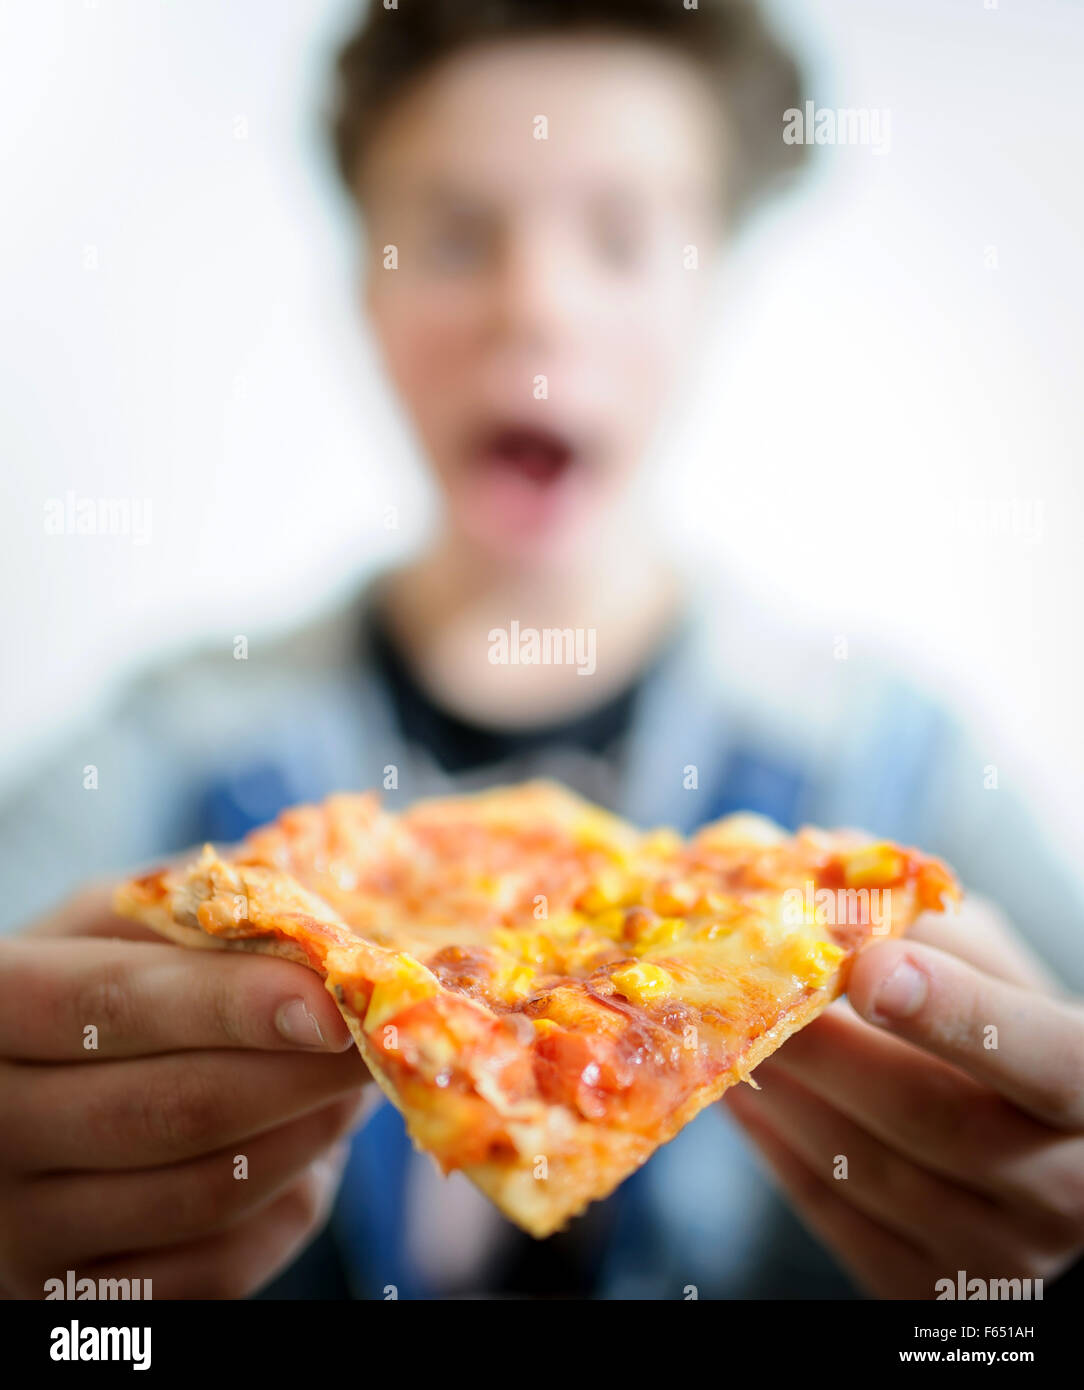 ILLUSTRATION - A boy wants to take a bite of a pizza. The photo was taken on 06 January 2015 in Dresden (Saxony). Photo: Thomas Eisenhuth Stock Photo